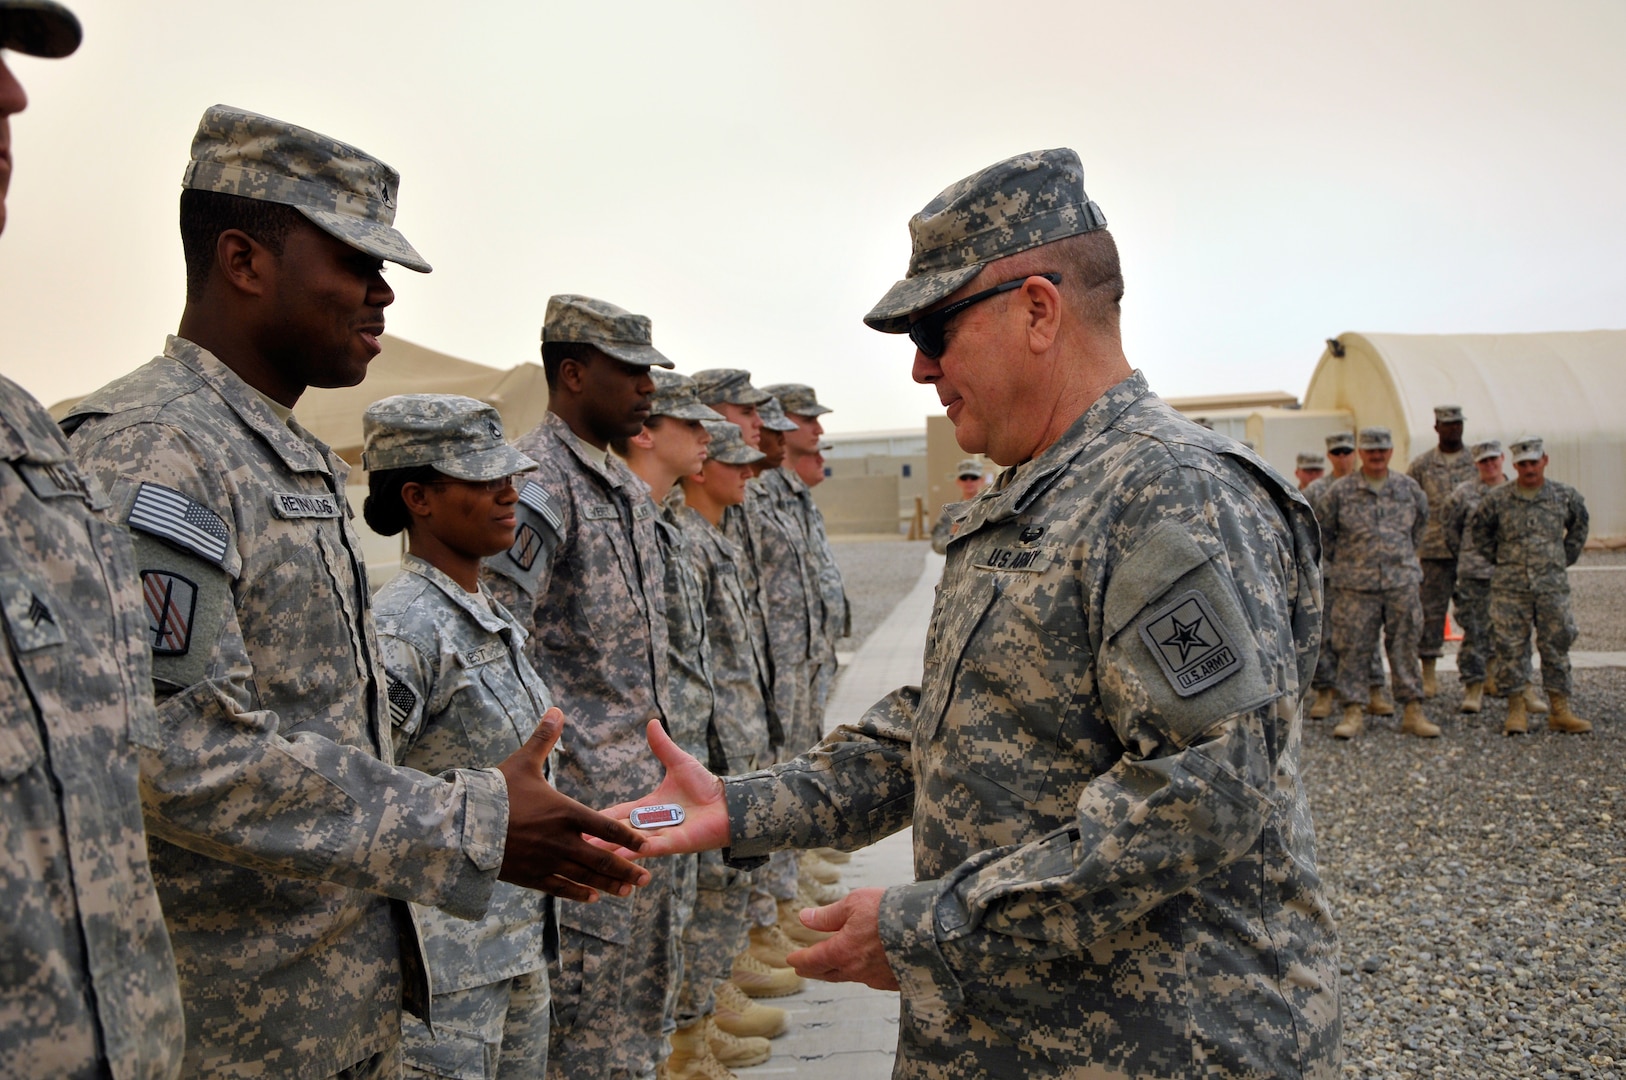 Army Lt. Gen. William Ingram Jr., the director of the Army National Guard, presents a National Guard coin of excellence to Army Sgt. Ferrell Reynolds of the North Carolina National Guard's 1452nd Transportation Company. The trip gave Ingram the opportunity to visit and talk with guardsmen and to see for himself the health and welfare of Army National Guard soldiers in Kuwait.